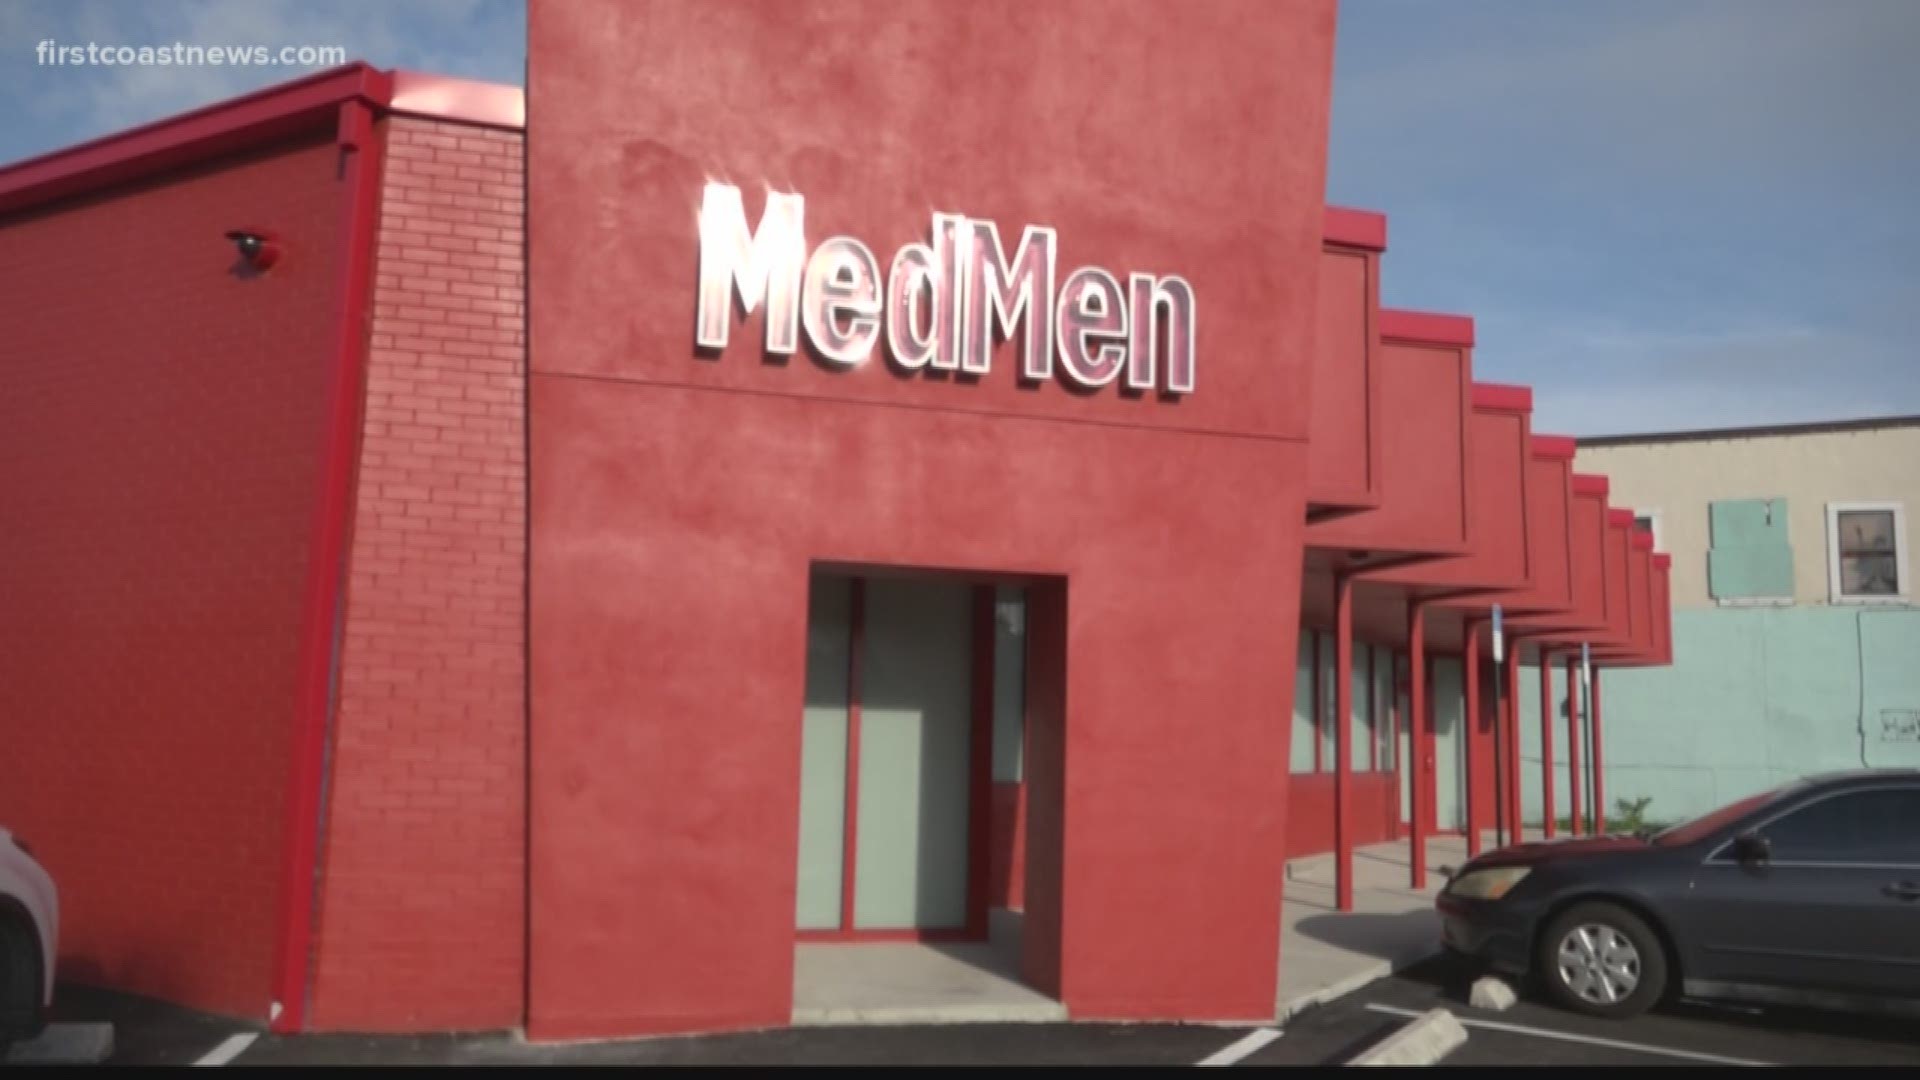 "Med Men" sells medical marijuana for people with a doctor-prescribed marijuana license. They can purchase marijuana in the form of vape pens, drops and many others.